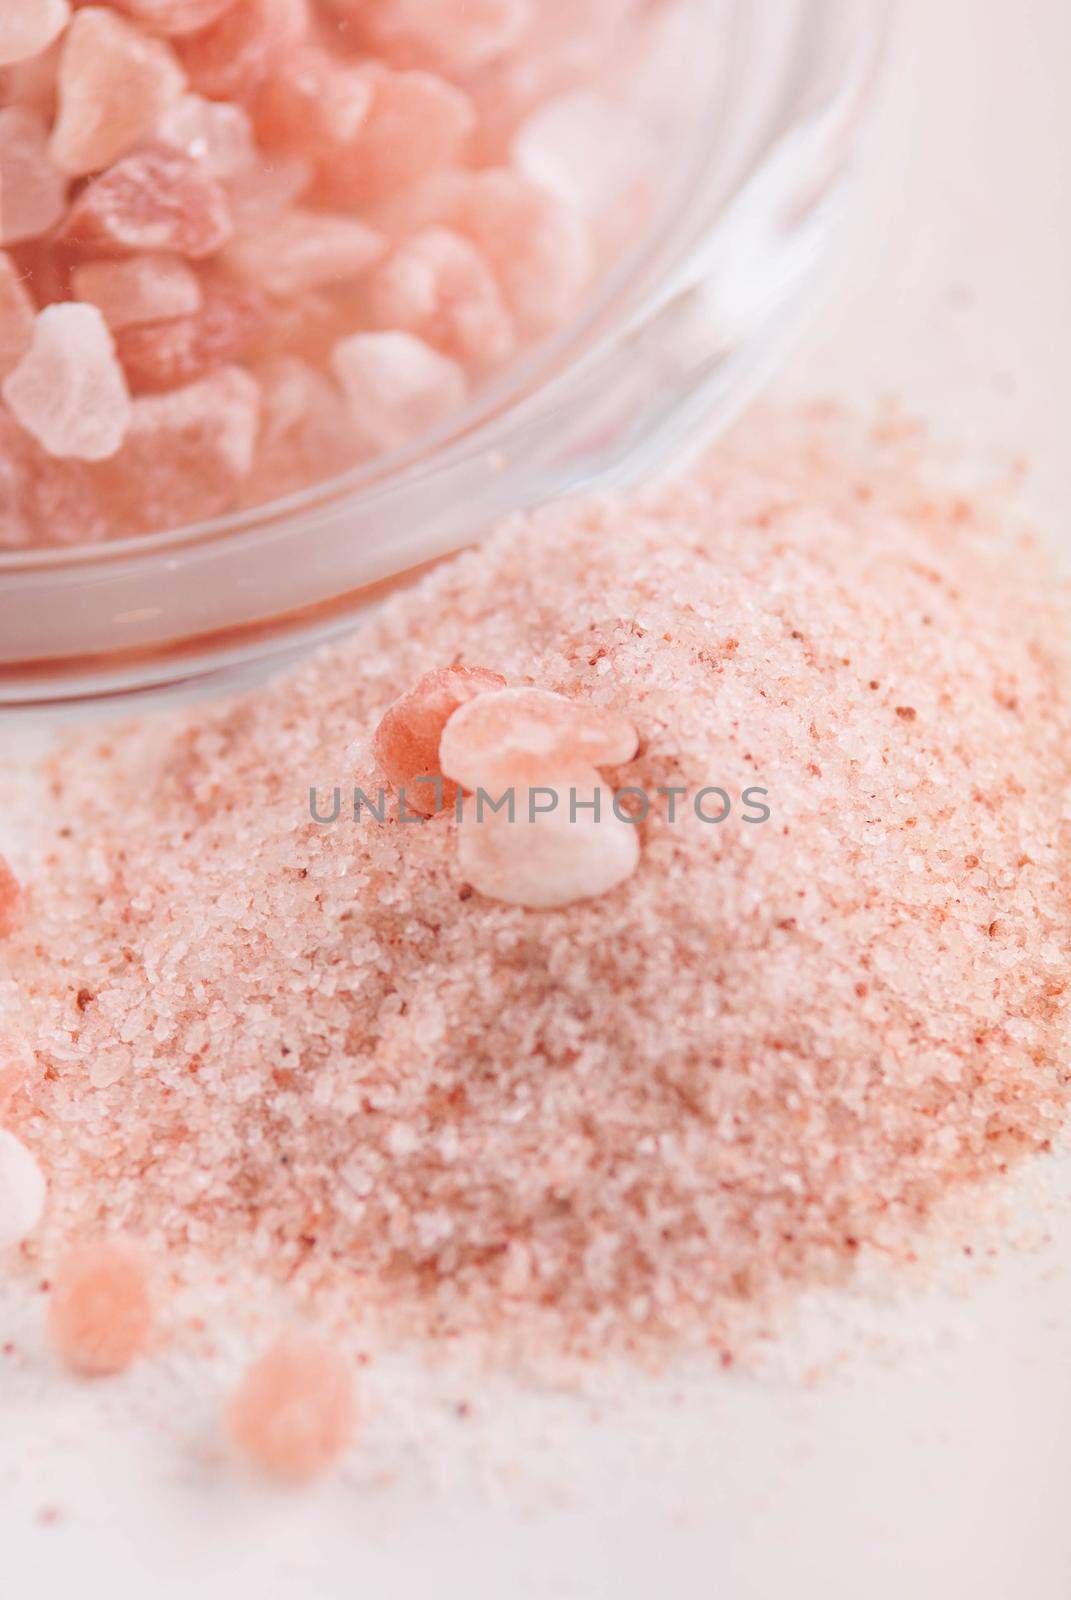 crystals of pink healthy himalayan salt in glass plate